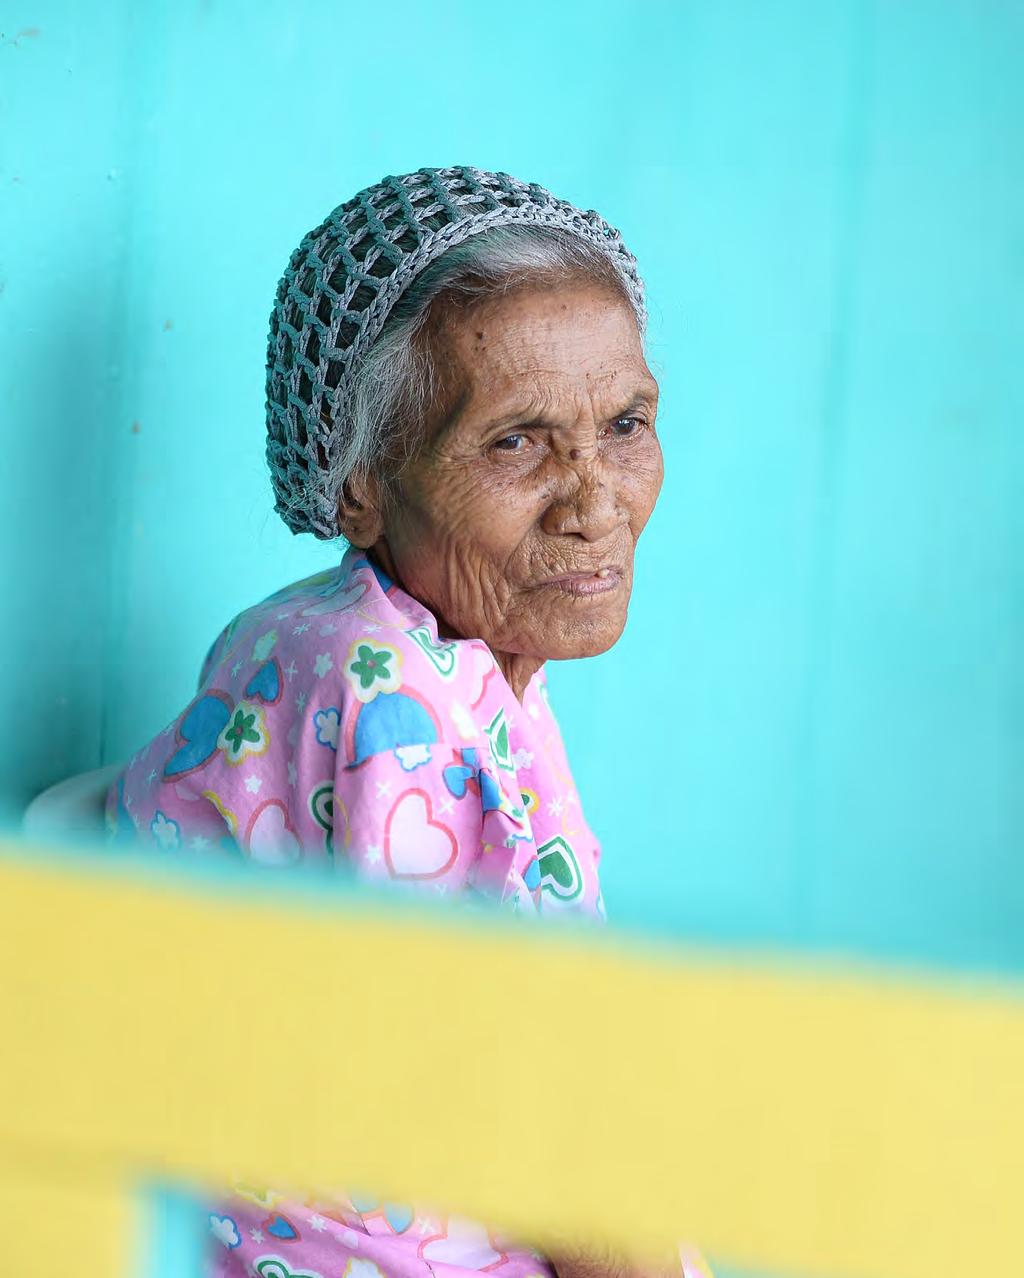 Buhaini Dimsian is over 70 years old and shares a room in a sports centre bunkhouses with her three granddaughters in Zamboanga,